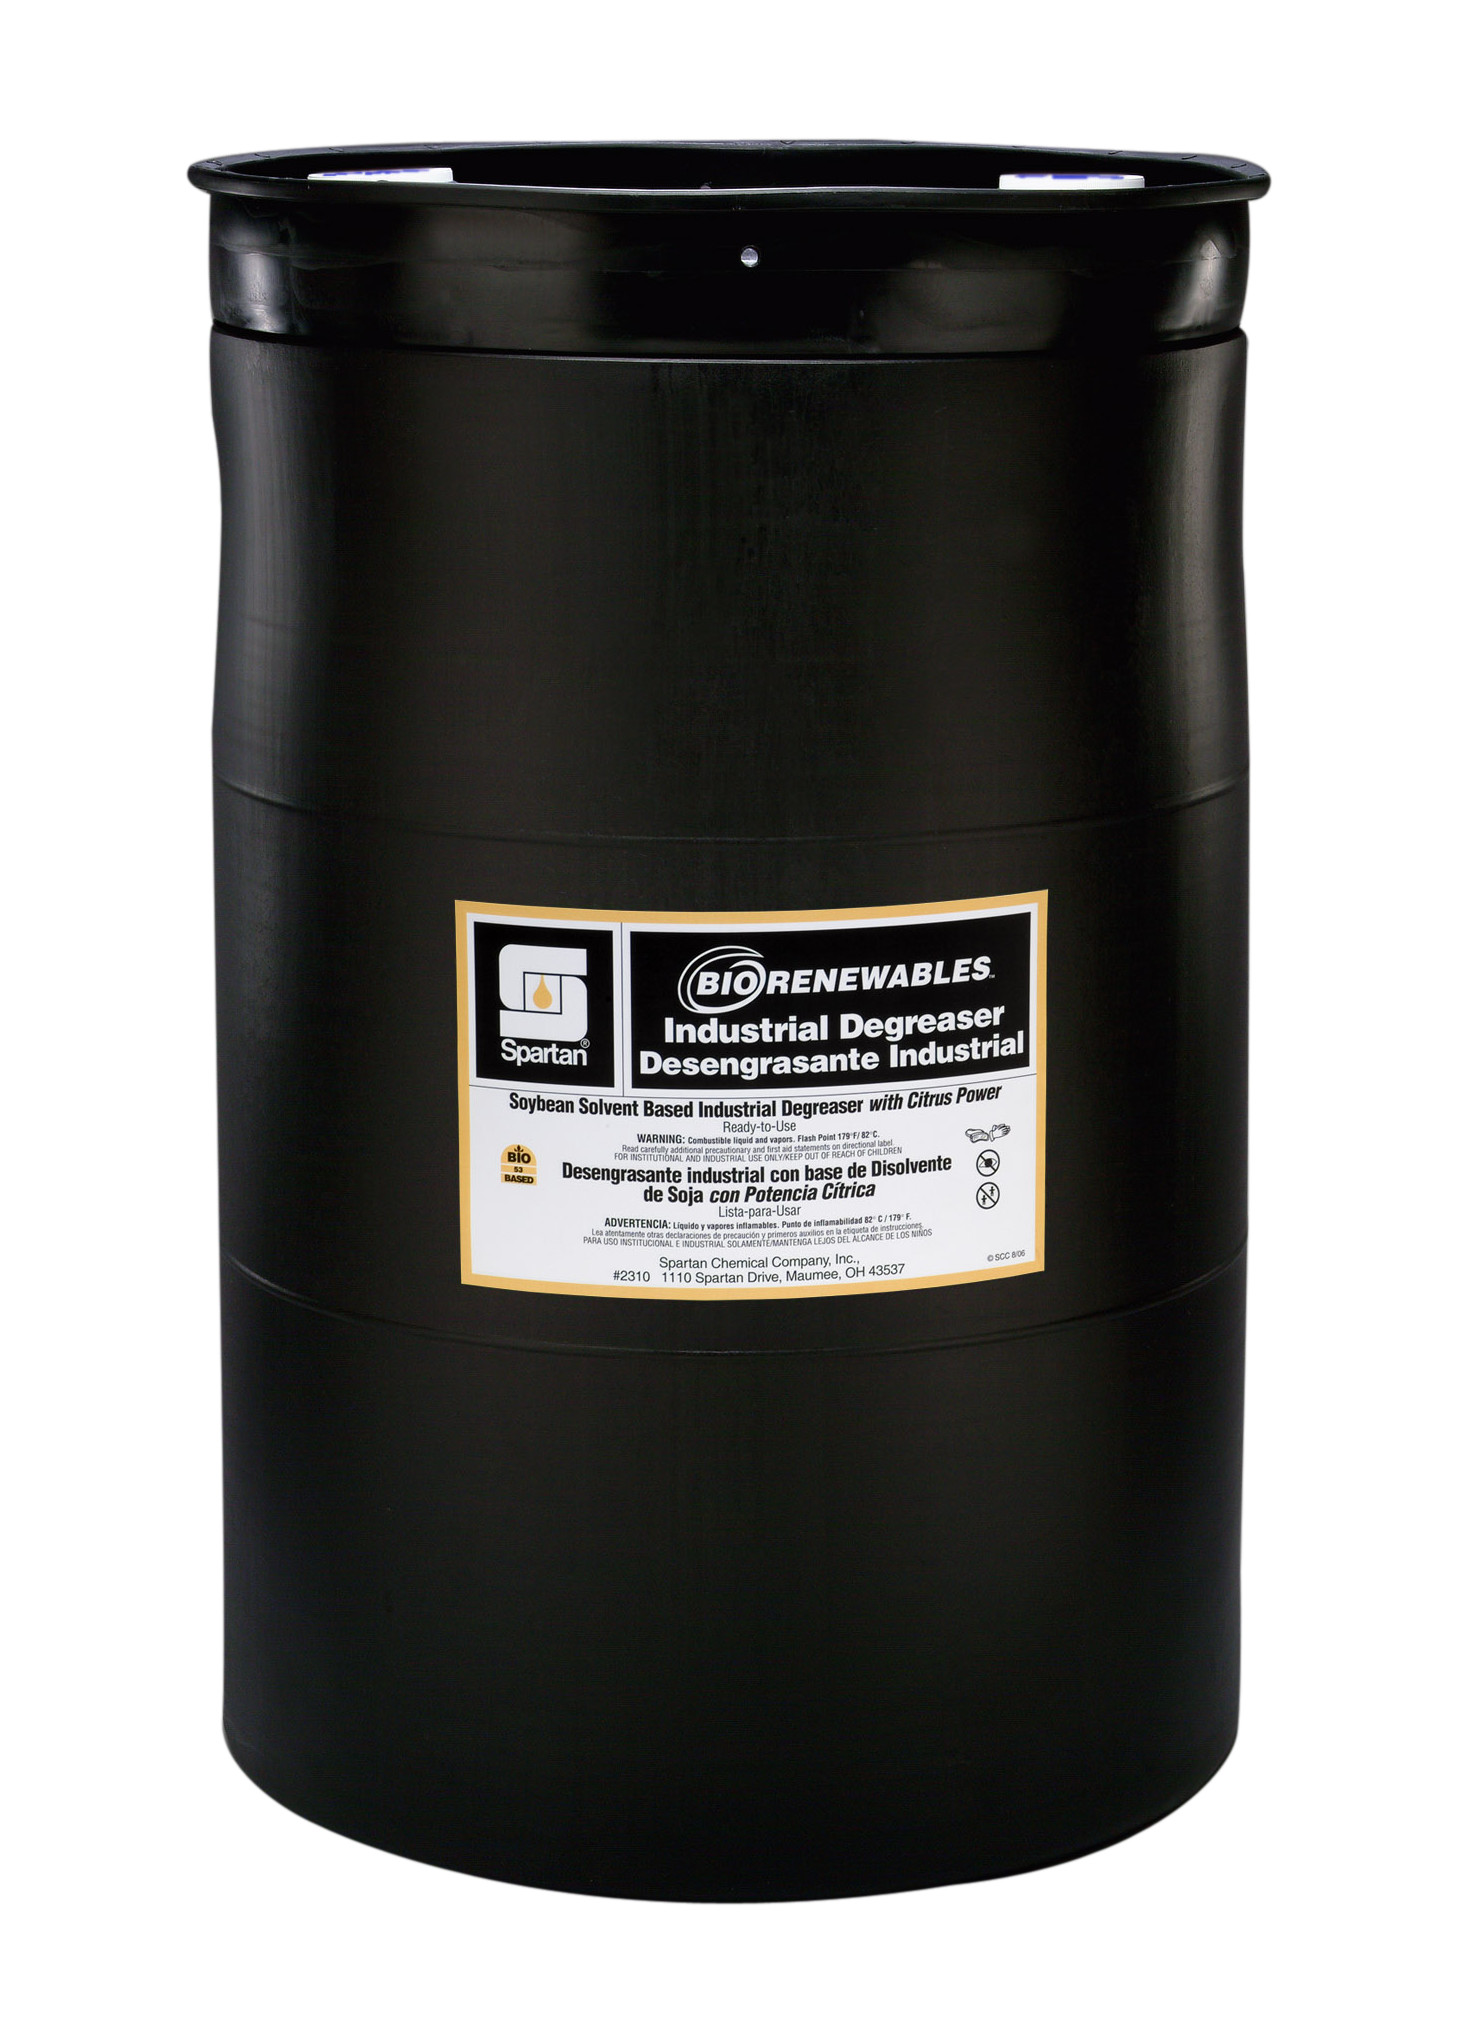 Spartan Chemical Company BioRenewables Industrial Degreaser, 55 GAL DRUM